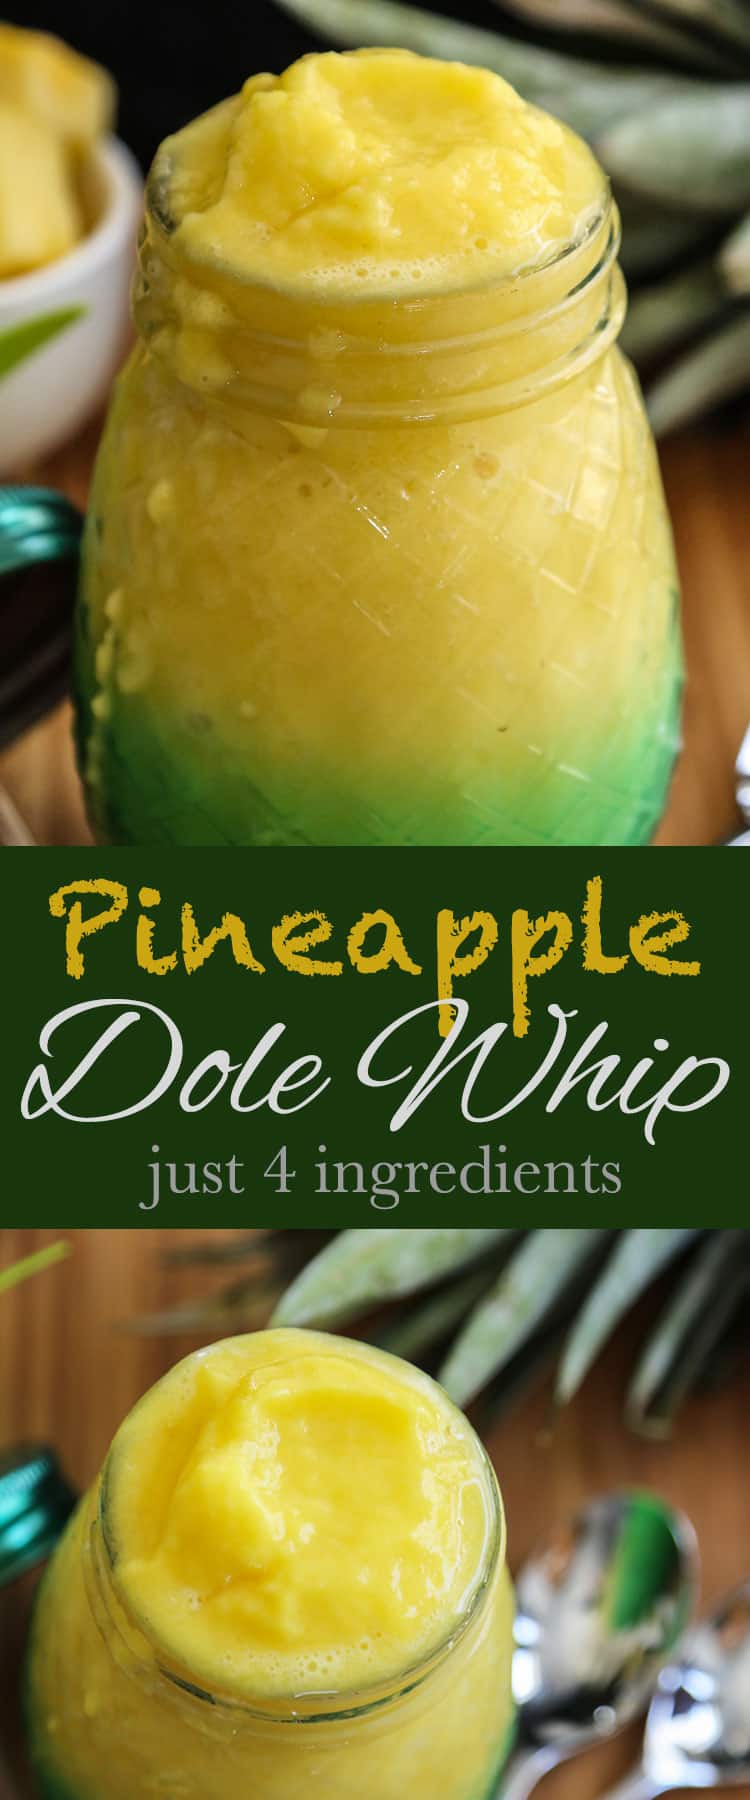 A cup, with Pineapple and Dole Whip